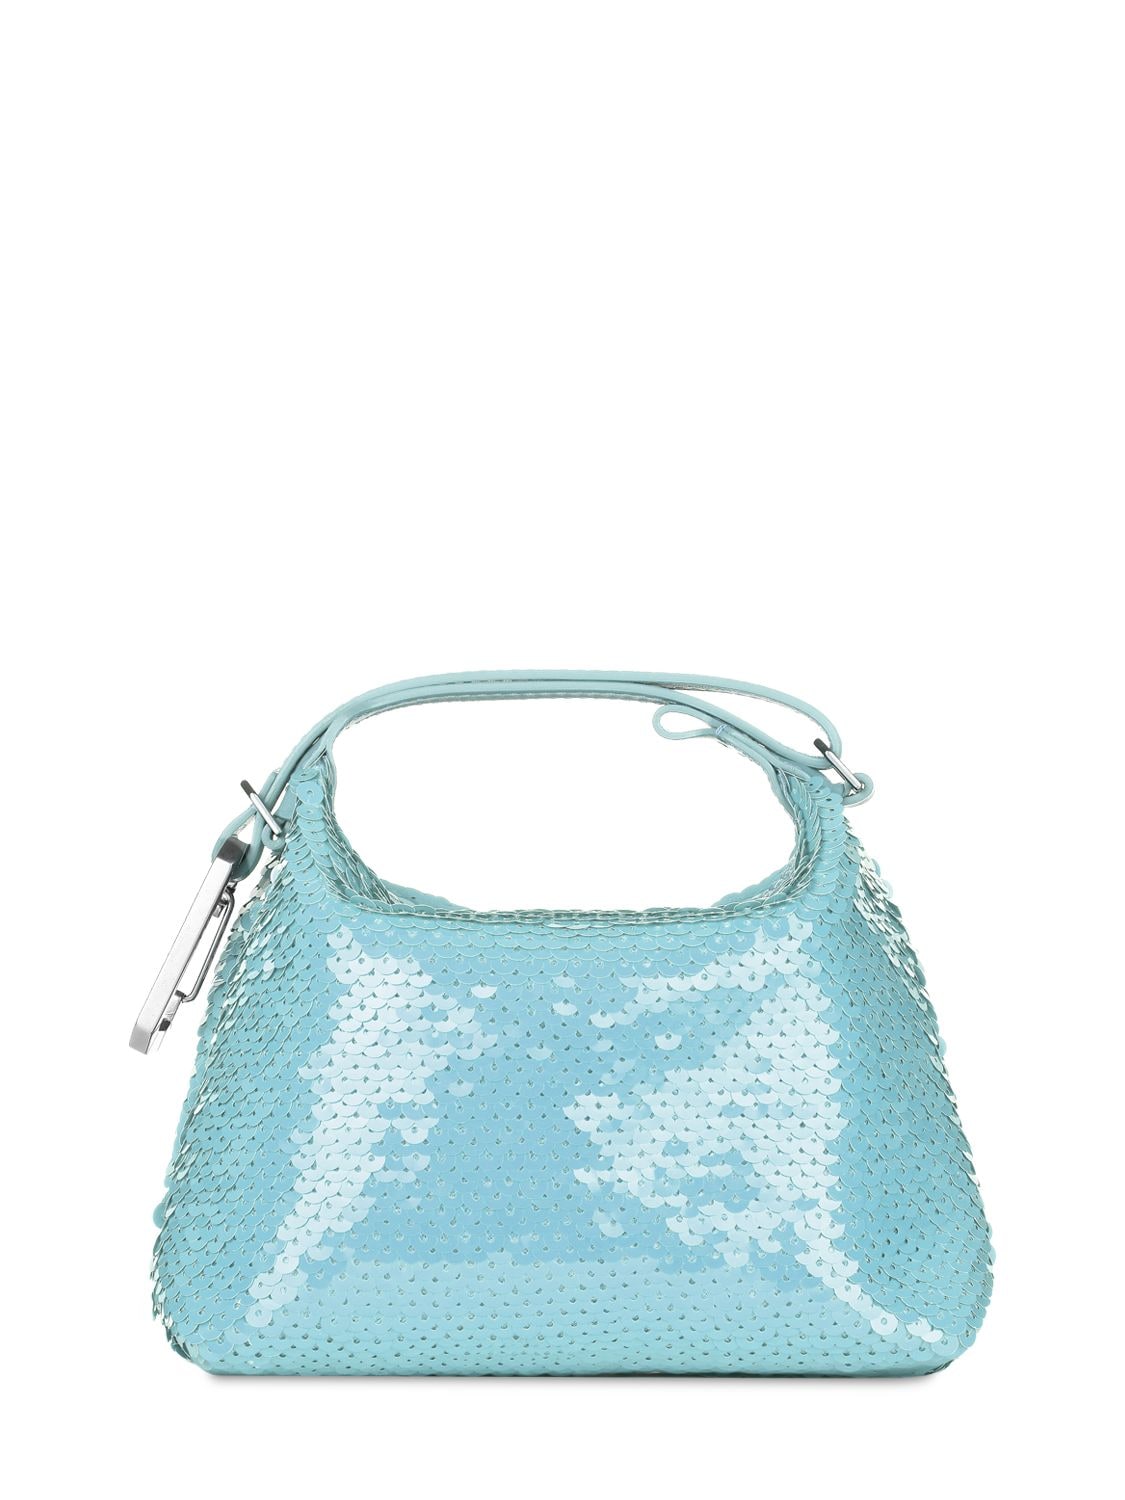 Image of Slim Moon Sequined Leather Bag